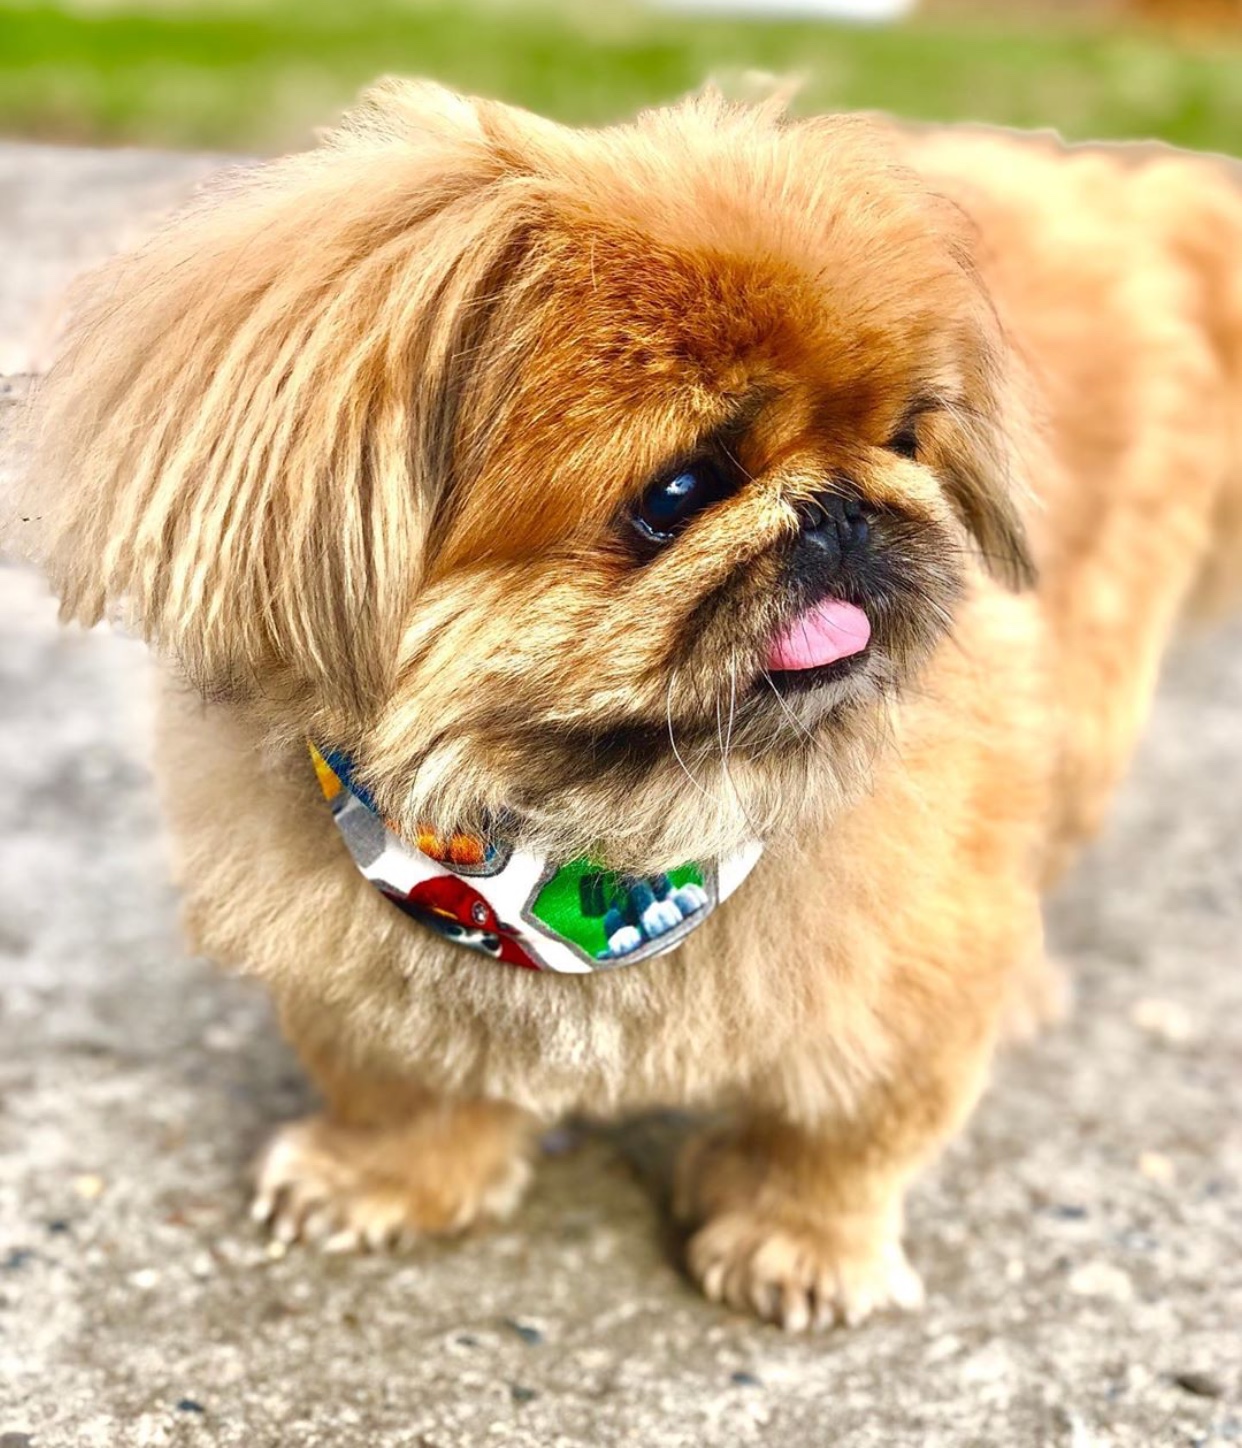 A Pekingese standing on the pavement while looking sideways